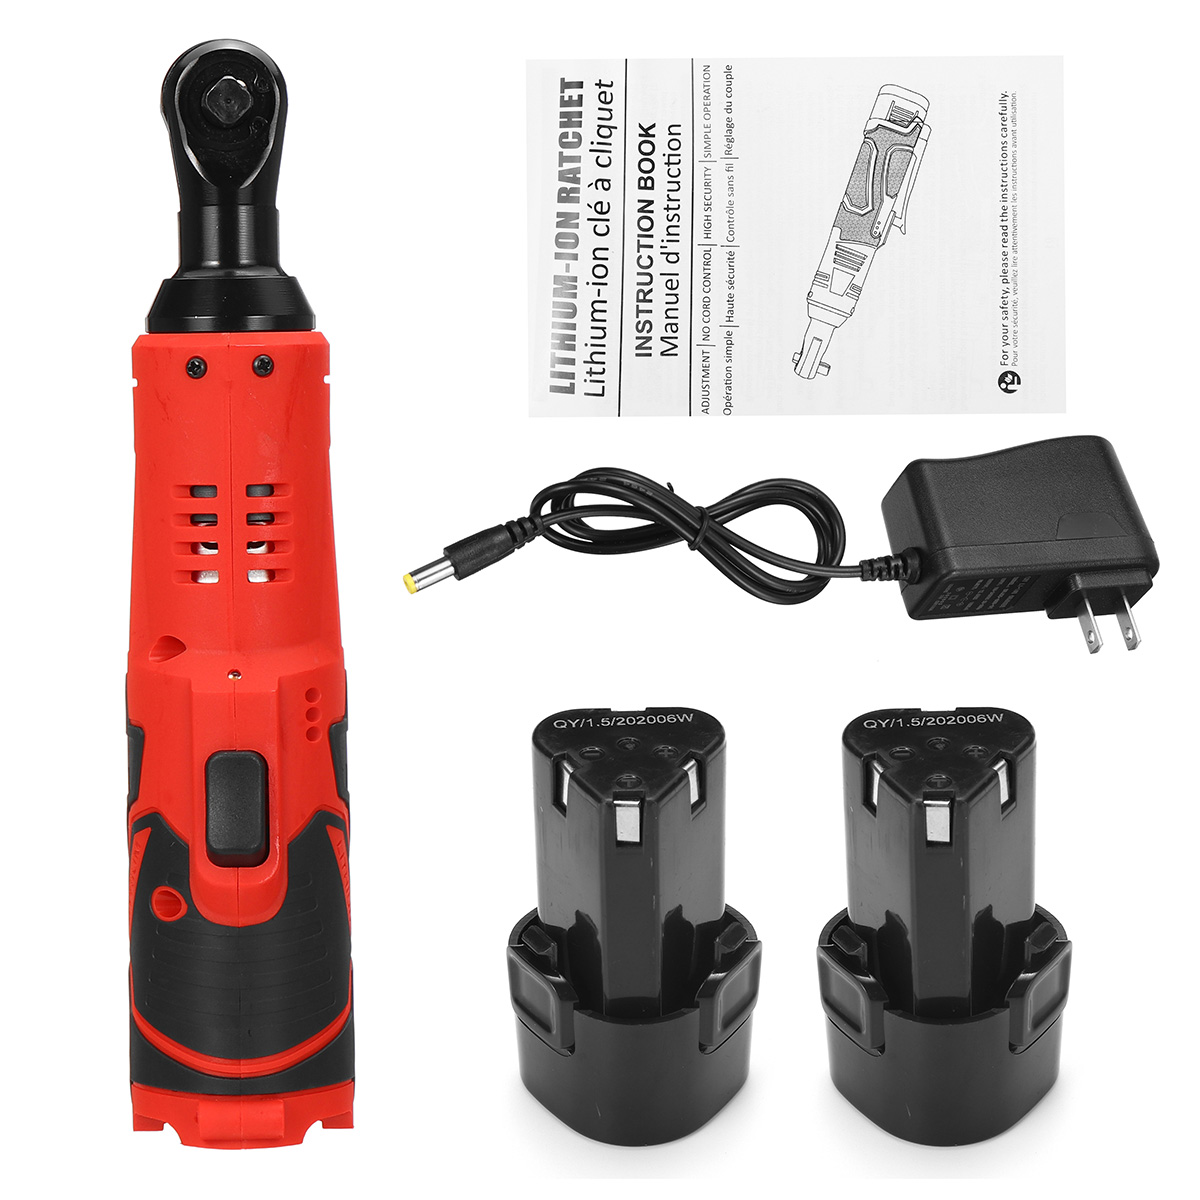 12V-4000mAh-Electric-Ratchet-Wrench-With-LED-Light-90deg-Angle-Wrench-Tool-W-12pcs-Battery-1714982-12